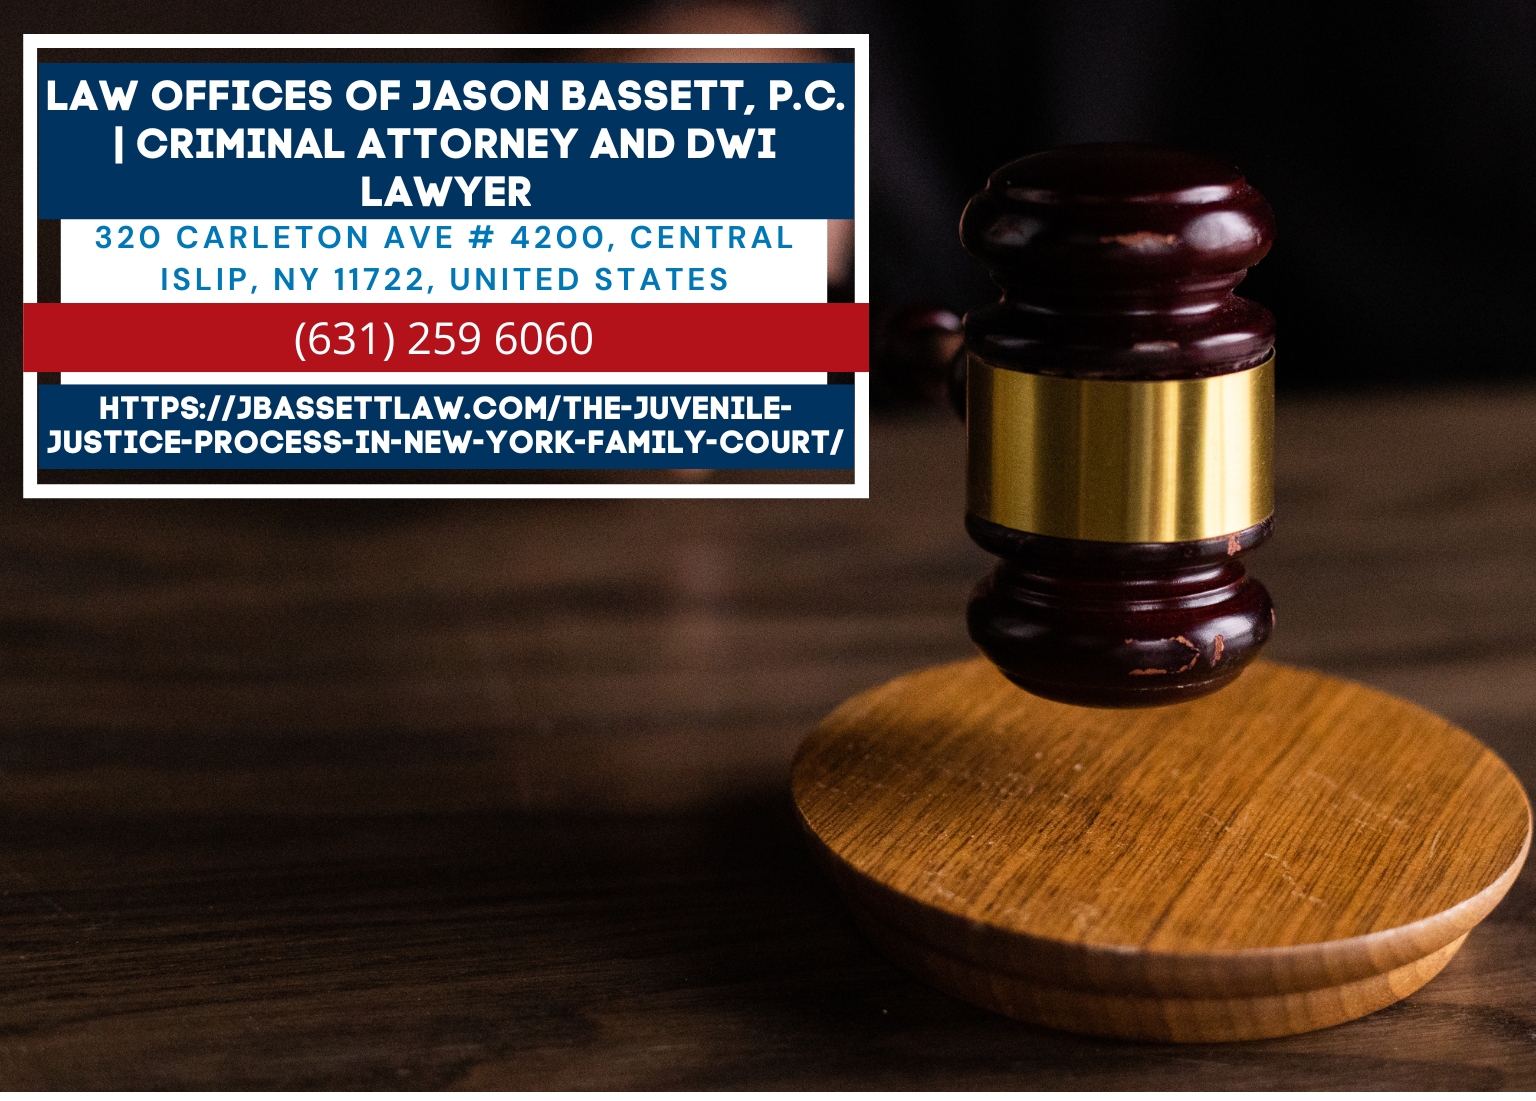 Long Island Juvenile Delinquency Lawyer Jason Bassett Releases Insights on NY Family Court's Juvenile Justice Process